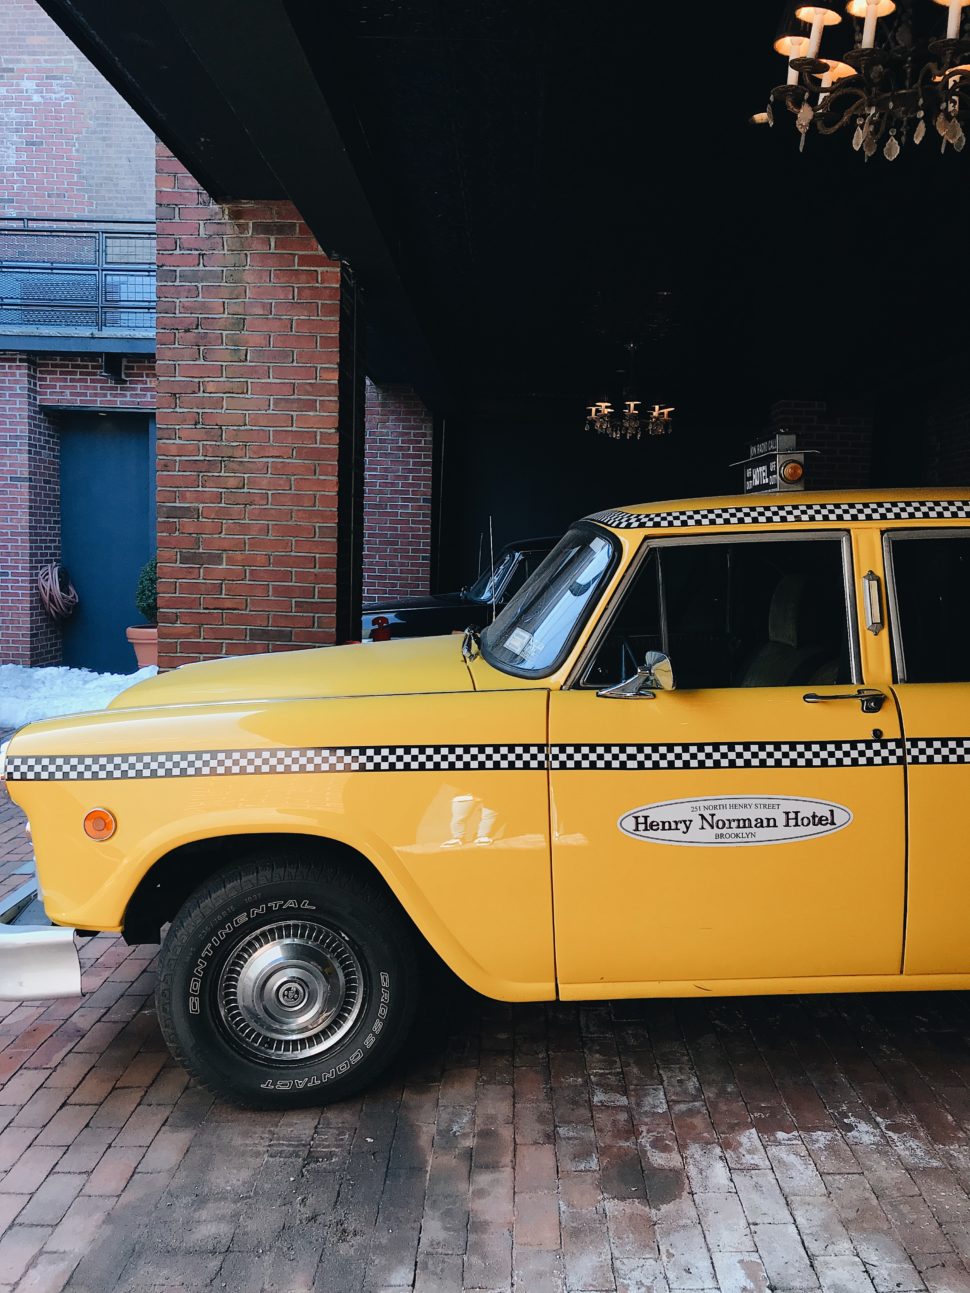 Henry Norman Hotel signature vintage yellow cab.